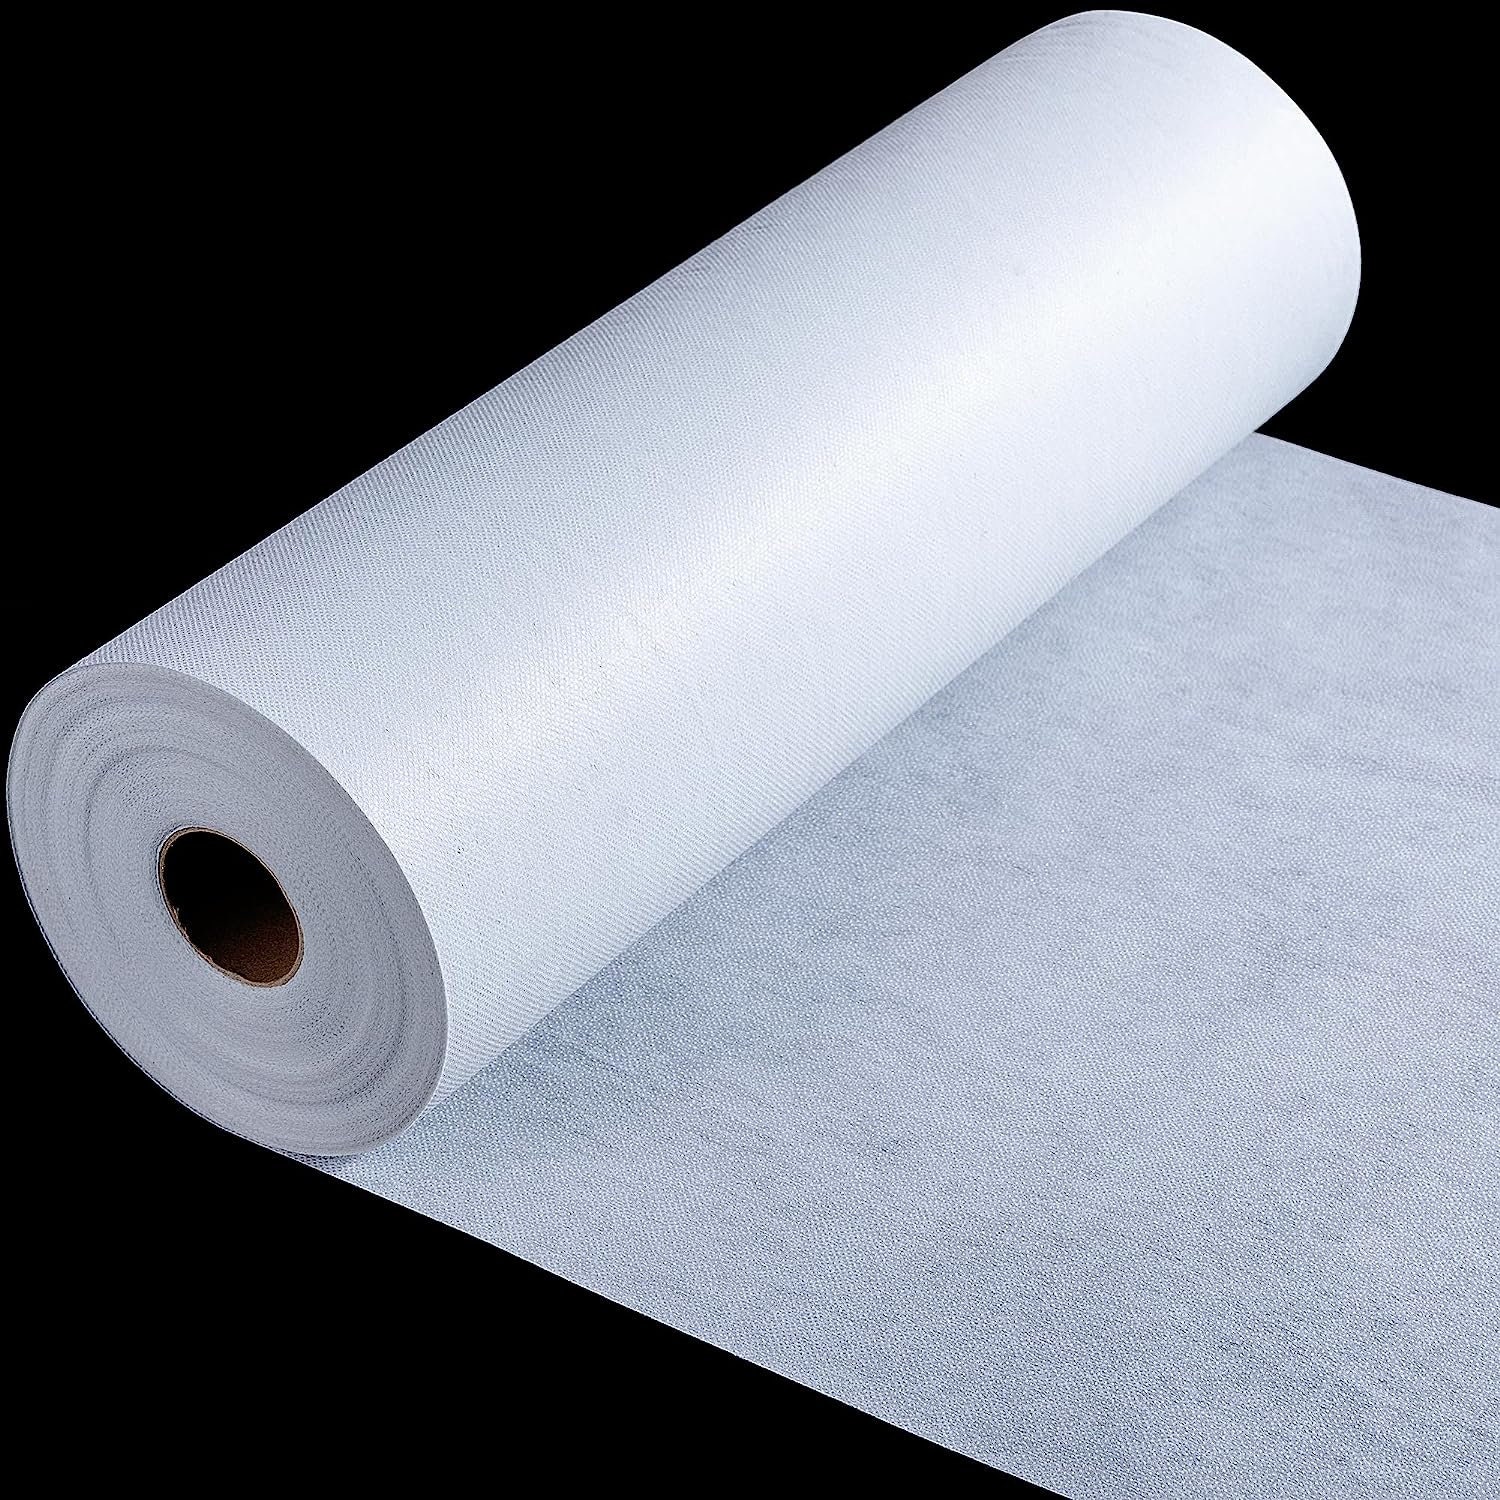 Heat N Bond Fusible Interfacing 20in X 1yd, Light Medium or Heavy Iron on  Interfacing, Choose One Weight or Combo of All 3, We Ship FAST 